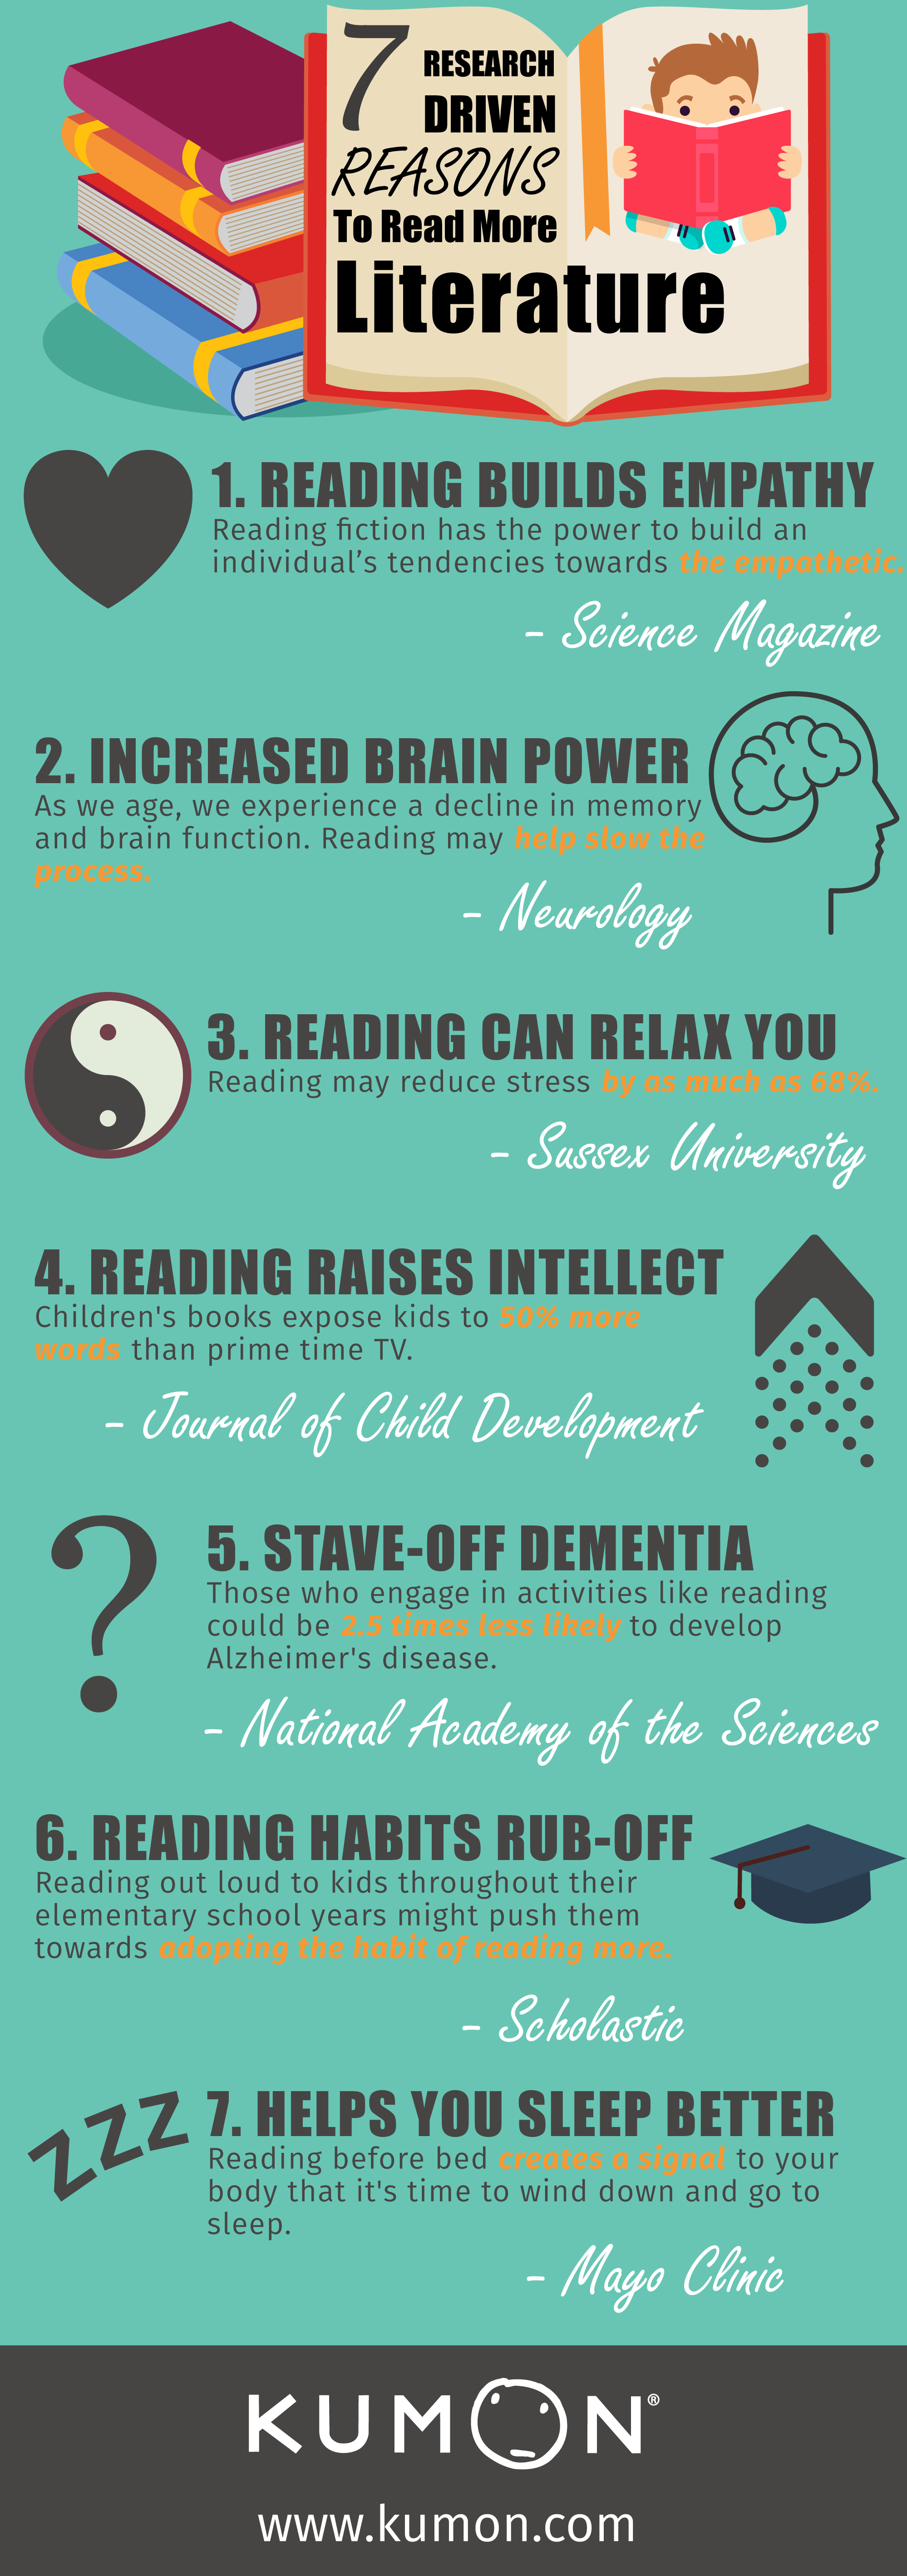 7 research-driven reasons to read more literature